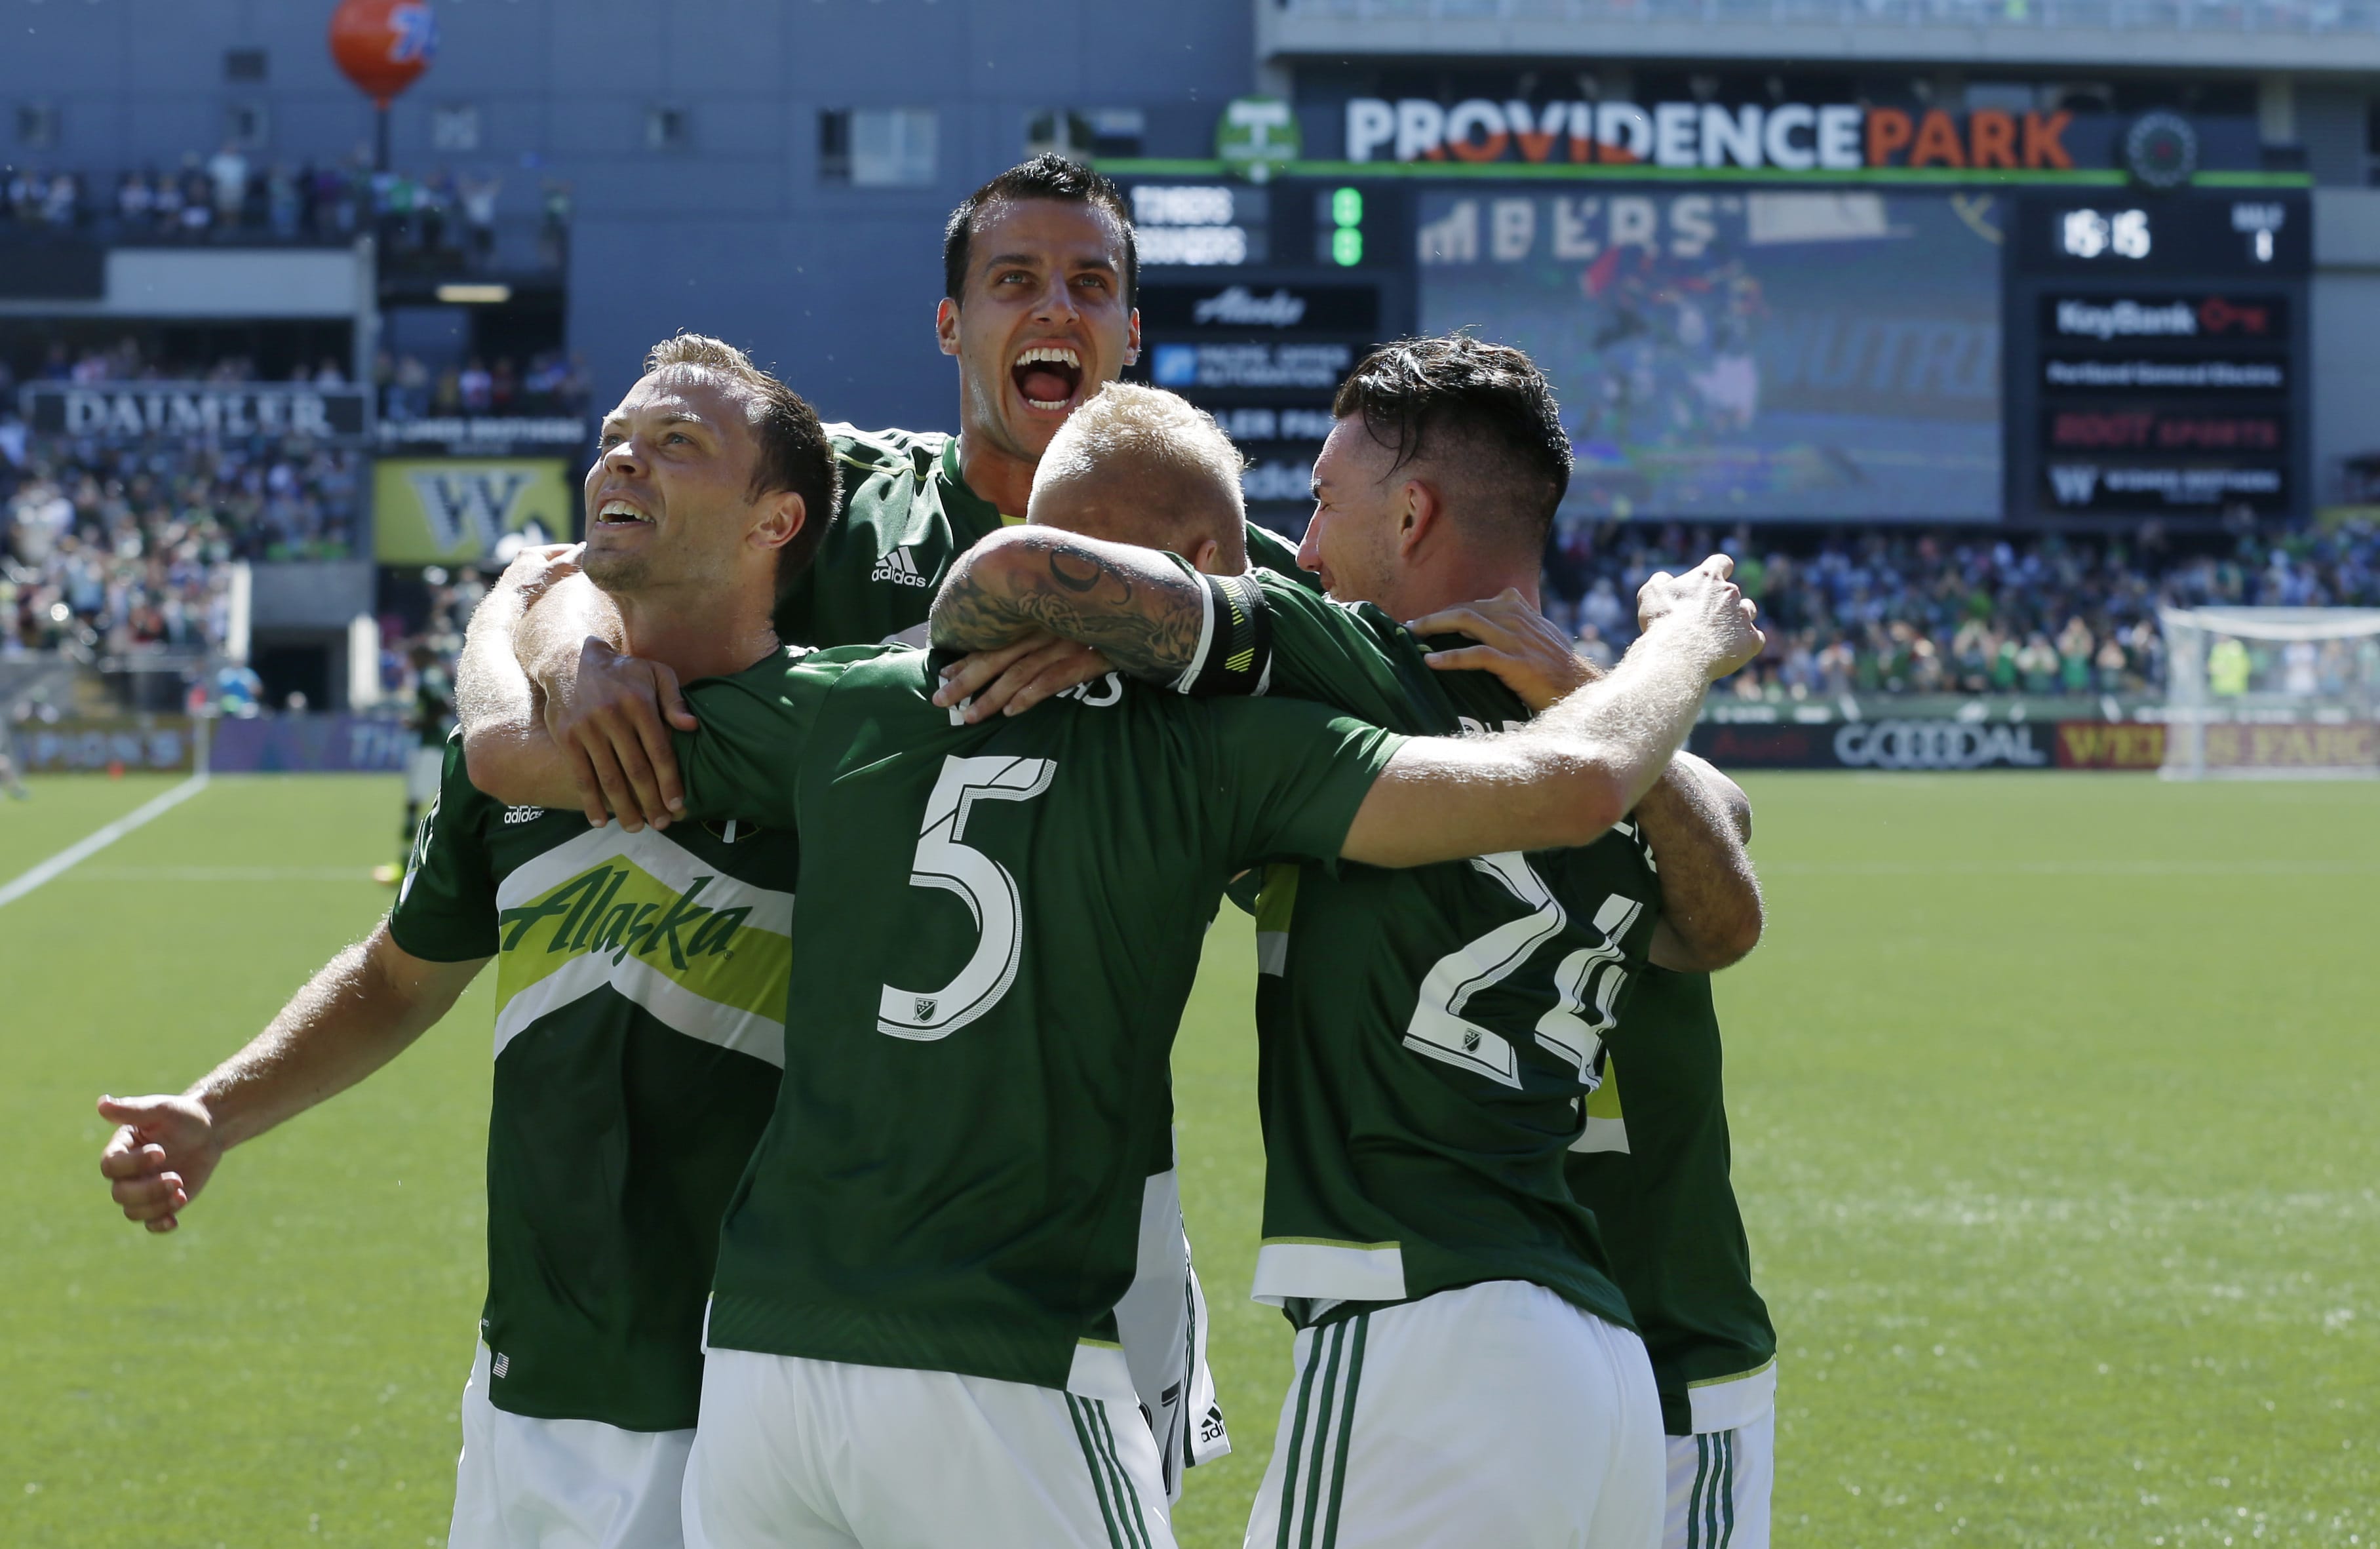 From left, Portland Timbers' Jack Jewsbury, Steven Taylor, Vytas Andriuskevicius (5), and Liam Ridgewell (24) celebrate after Andriuskevicius scored a goal against the Seattle Sounders in the first half of an MLS soccer match, Sunday, Aug. 28, 2016, in Portland, Ore. (AP Photo/Ted S.